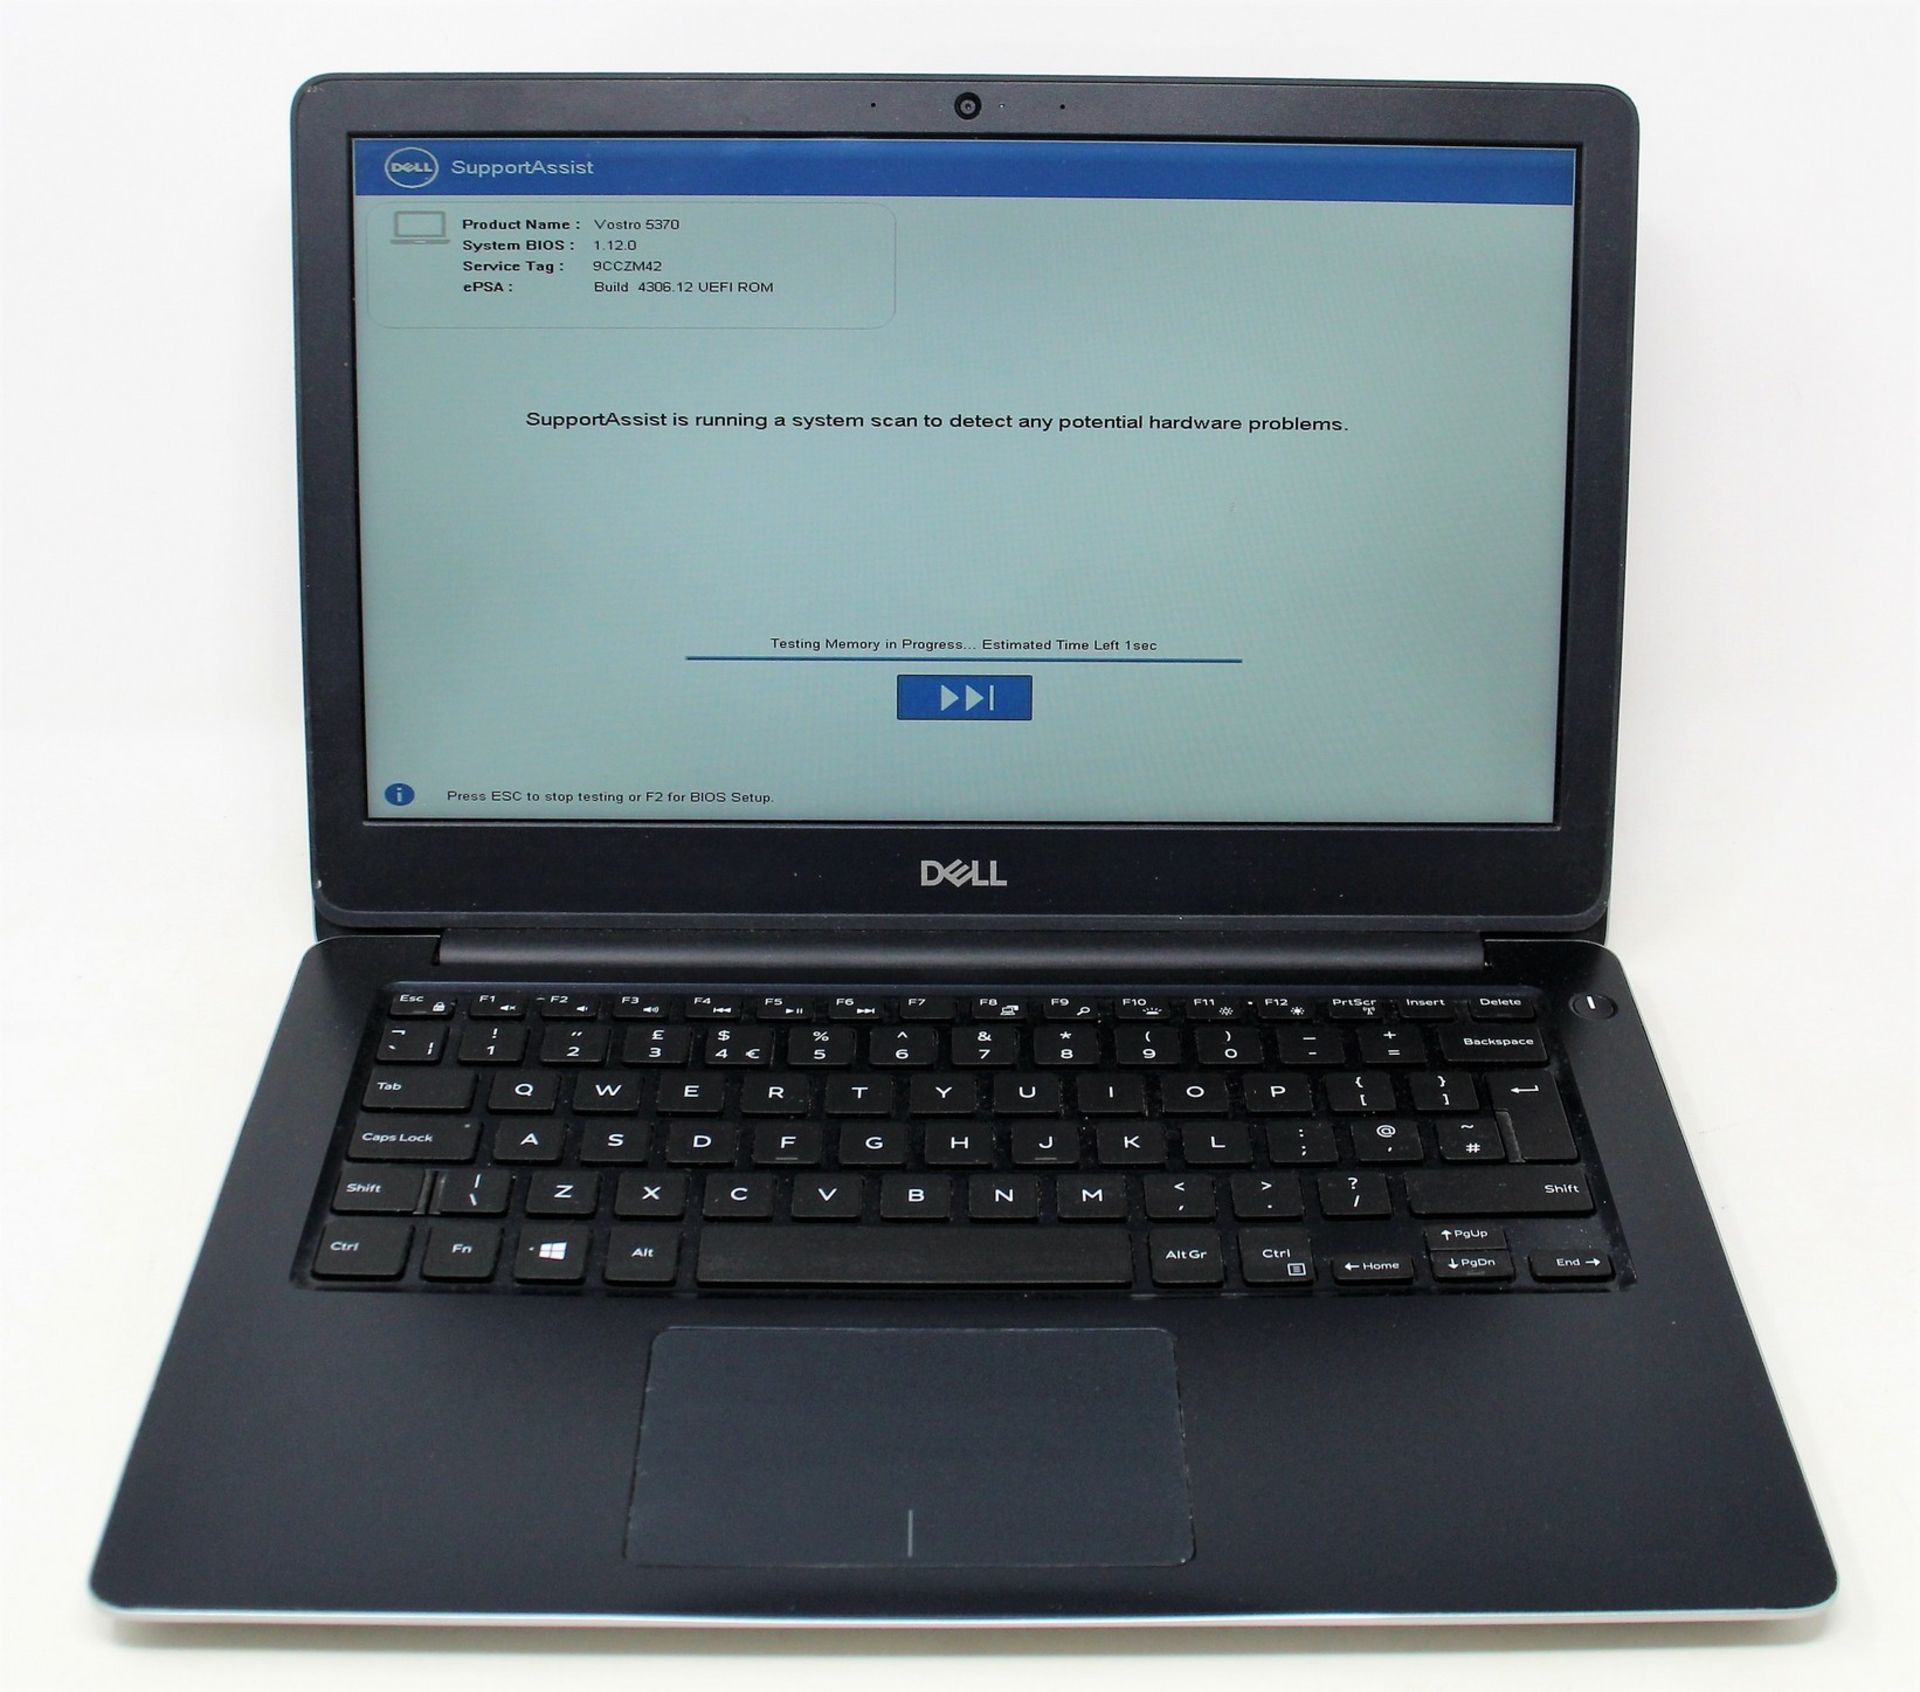 FOR REPAIR - NO OS INSTALLED - A pre-owned 13.3" Dell Vostra laptop in silver with Intel i7-8550U